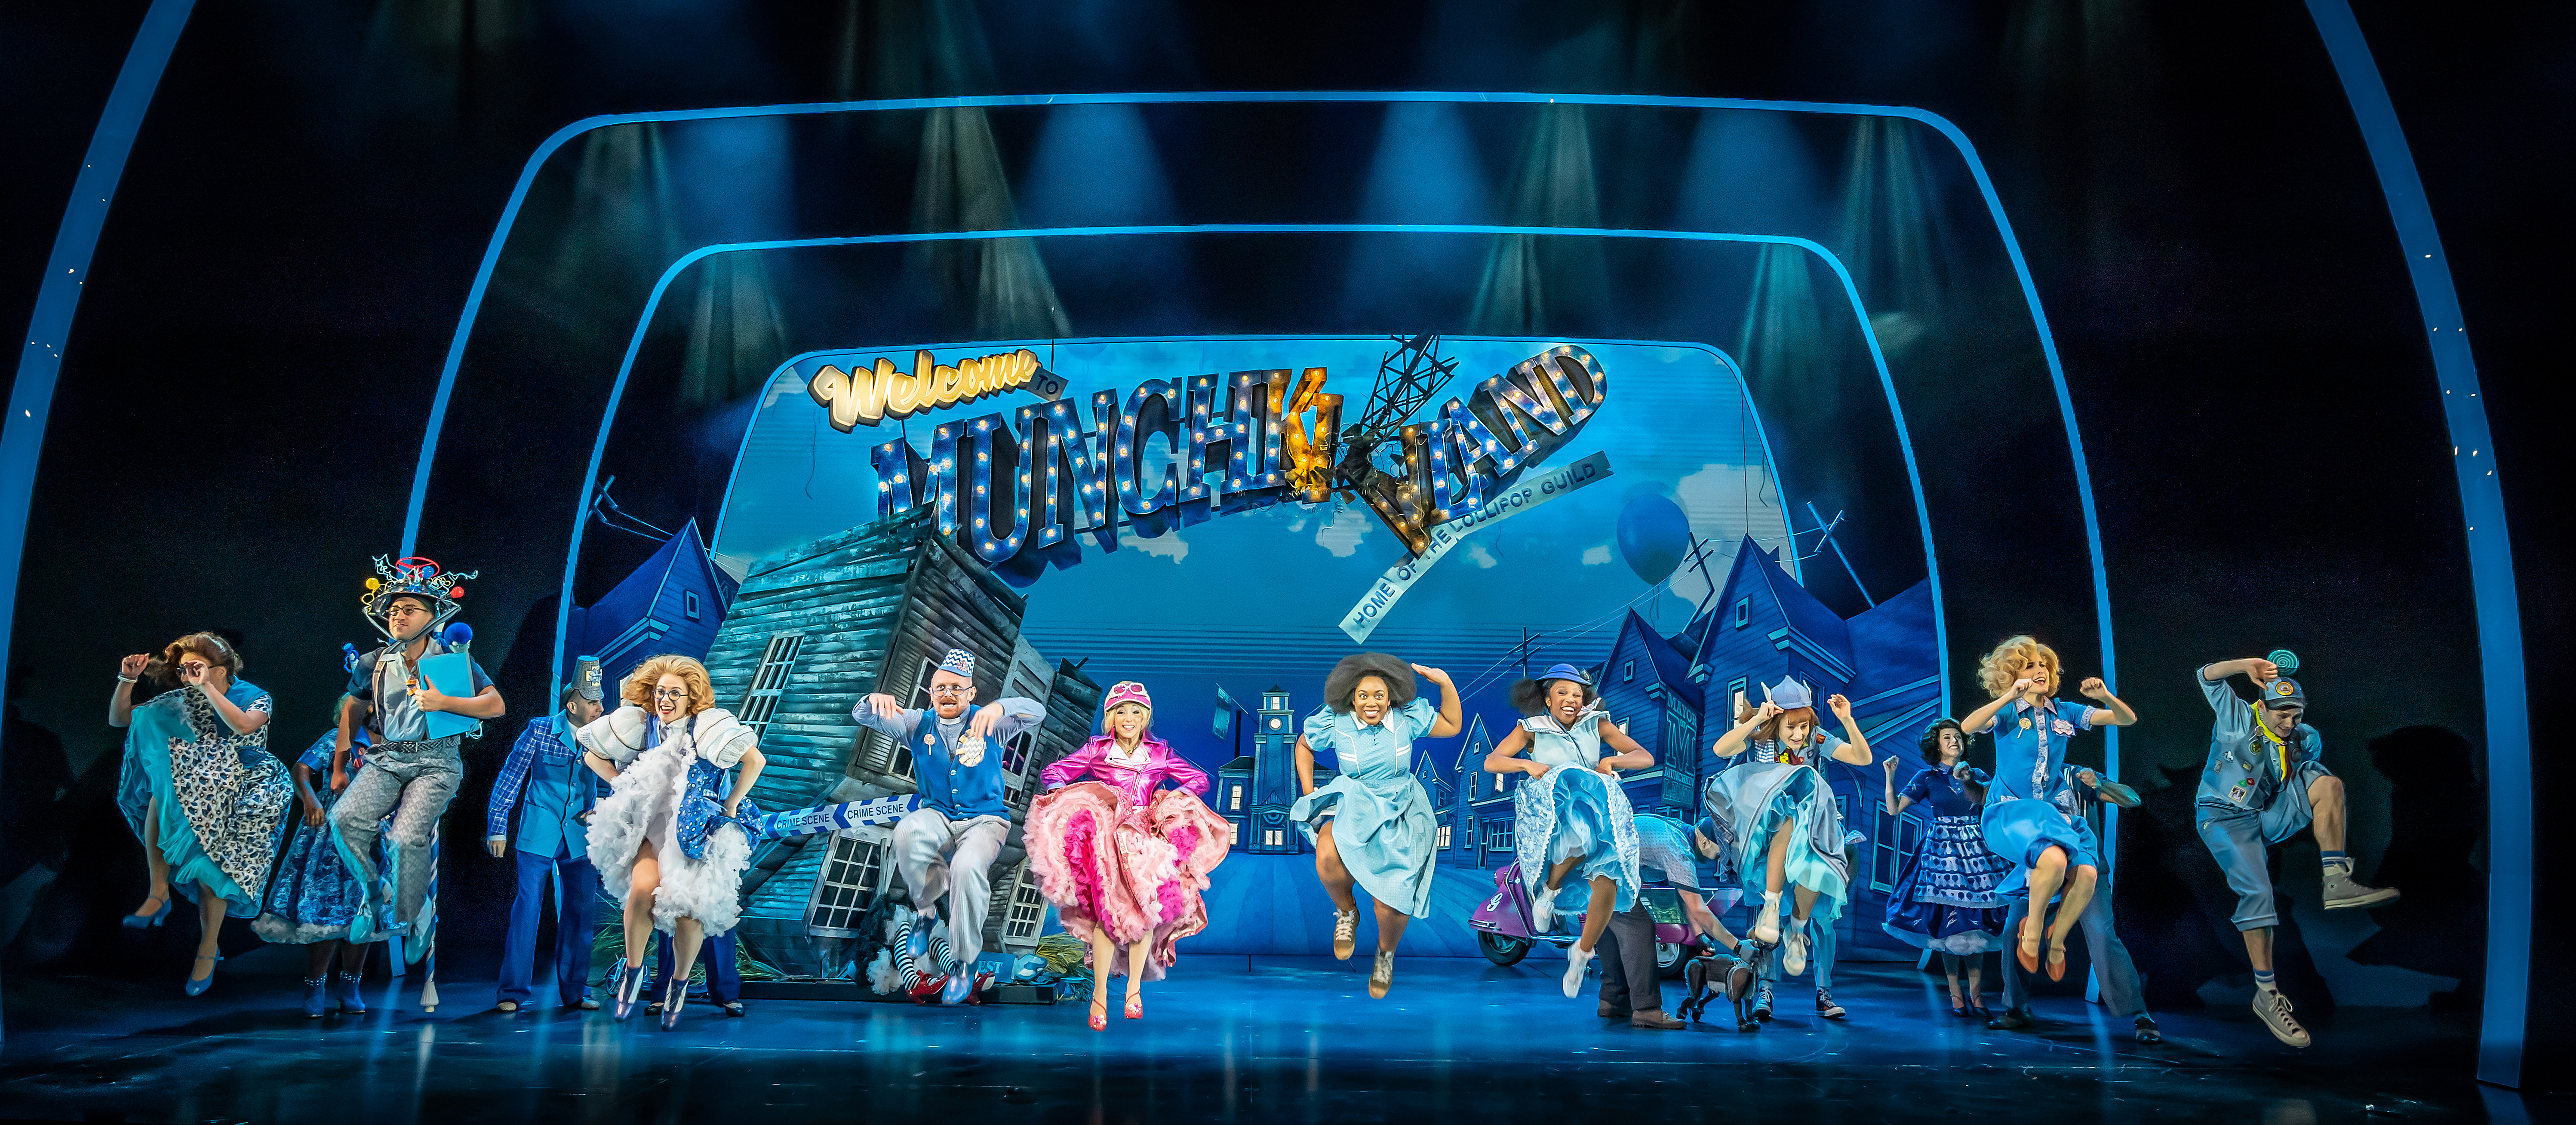 The Wizard of Oz Gets a 21st Century Makeover at Leicester’s Iconic Curve Theatre with Martin Fixtures